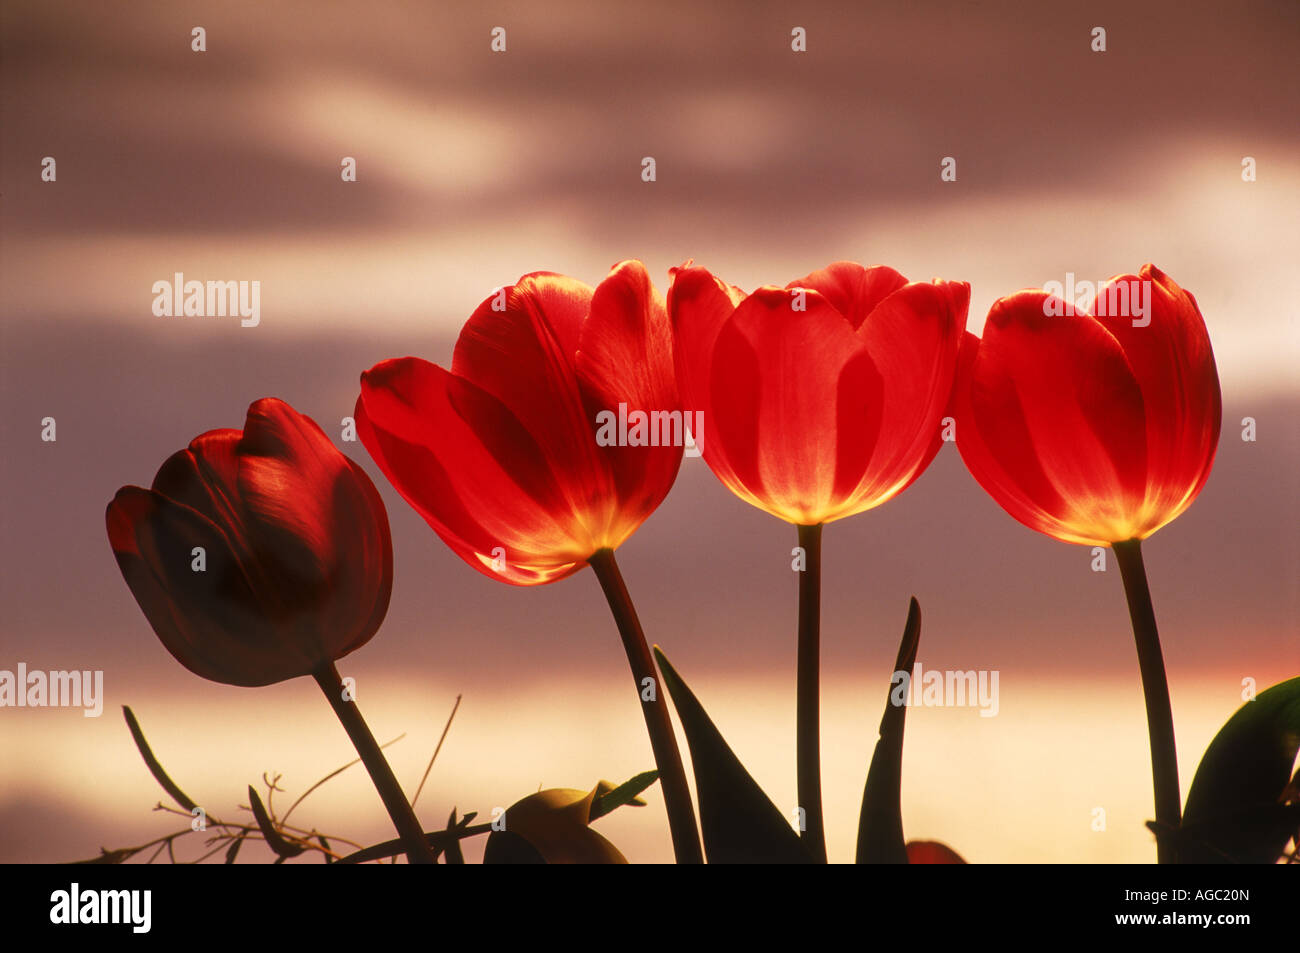 Red tulips highlighted under sunset skies Stock Photo